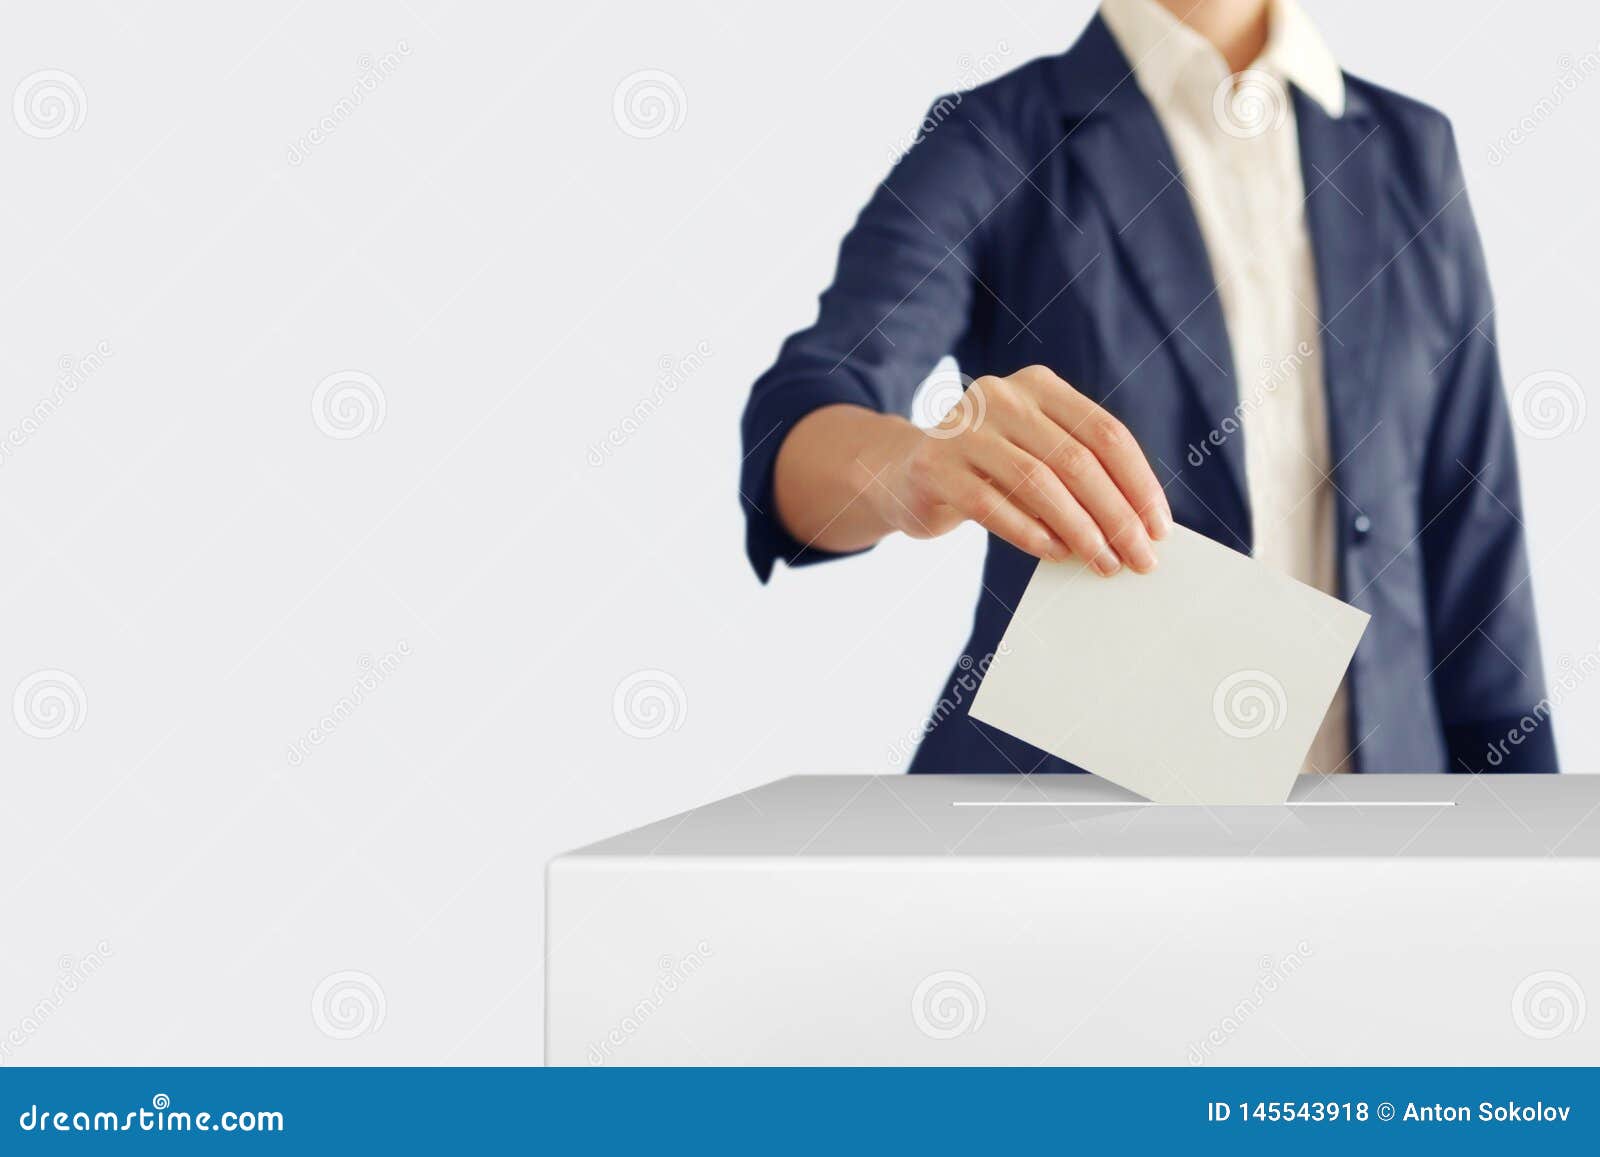 voting. woman putting a ballot into a voting box